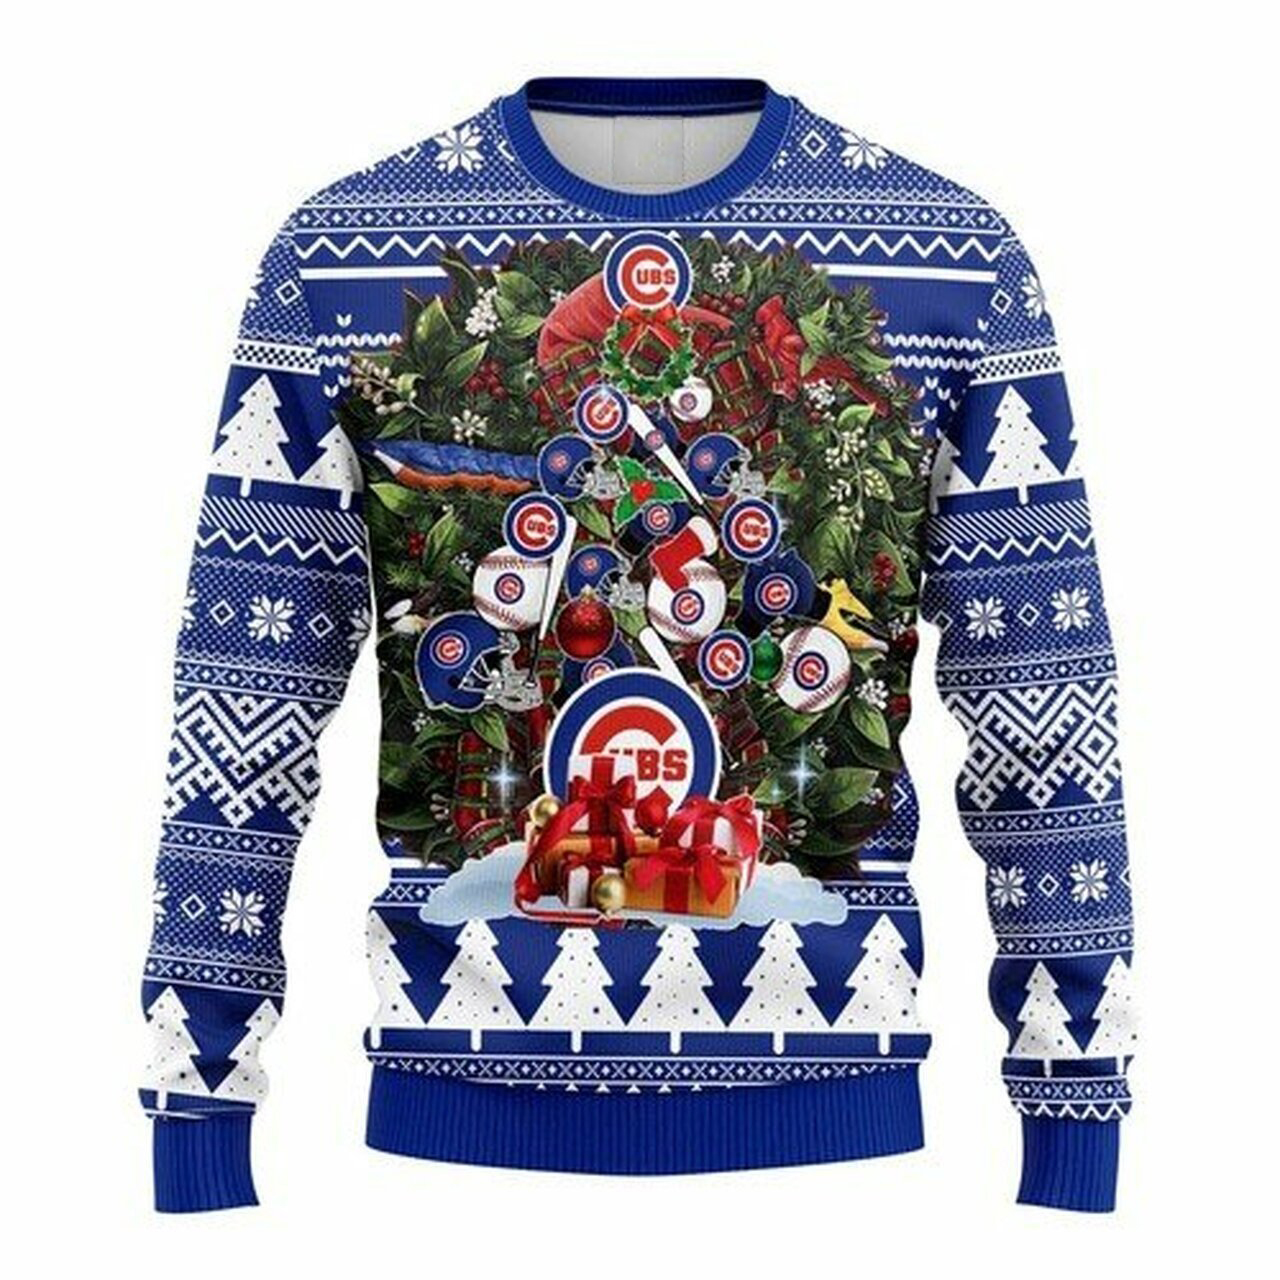 MLB Chicago Cubs christmas tree ugly sweater